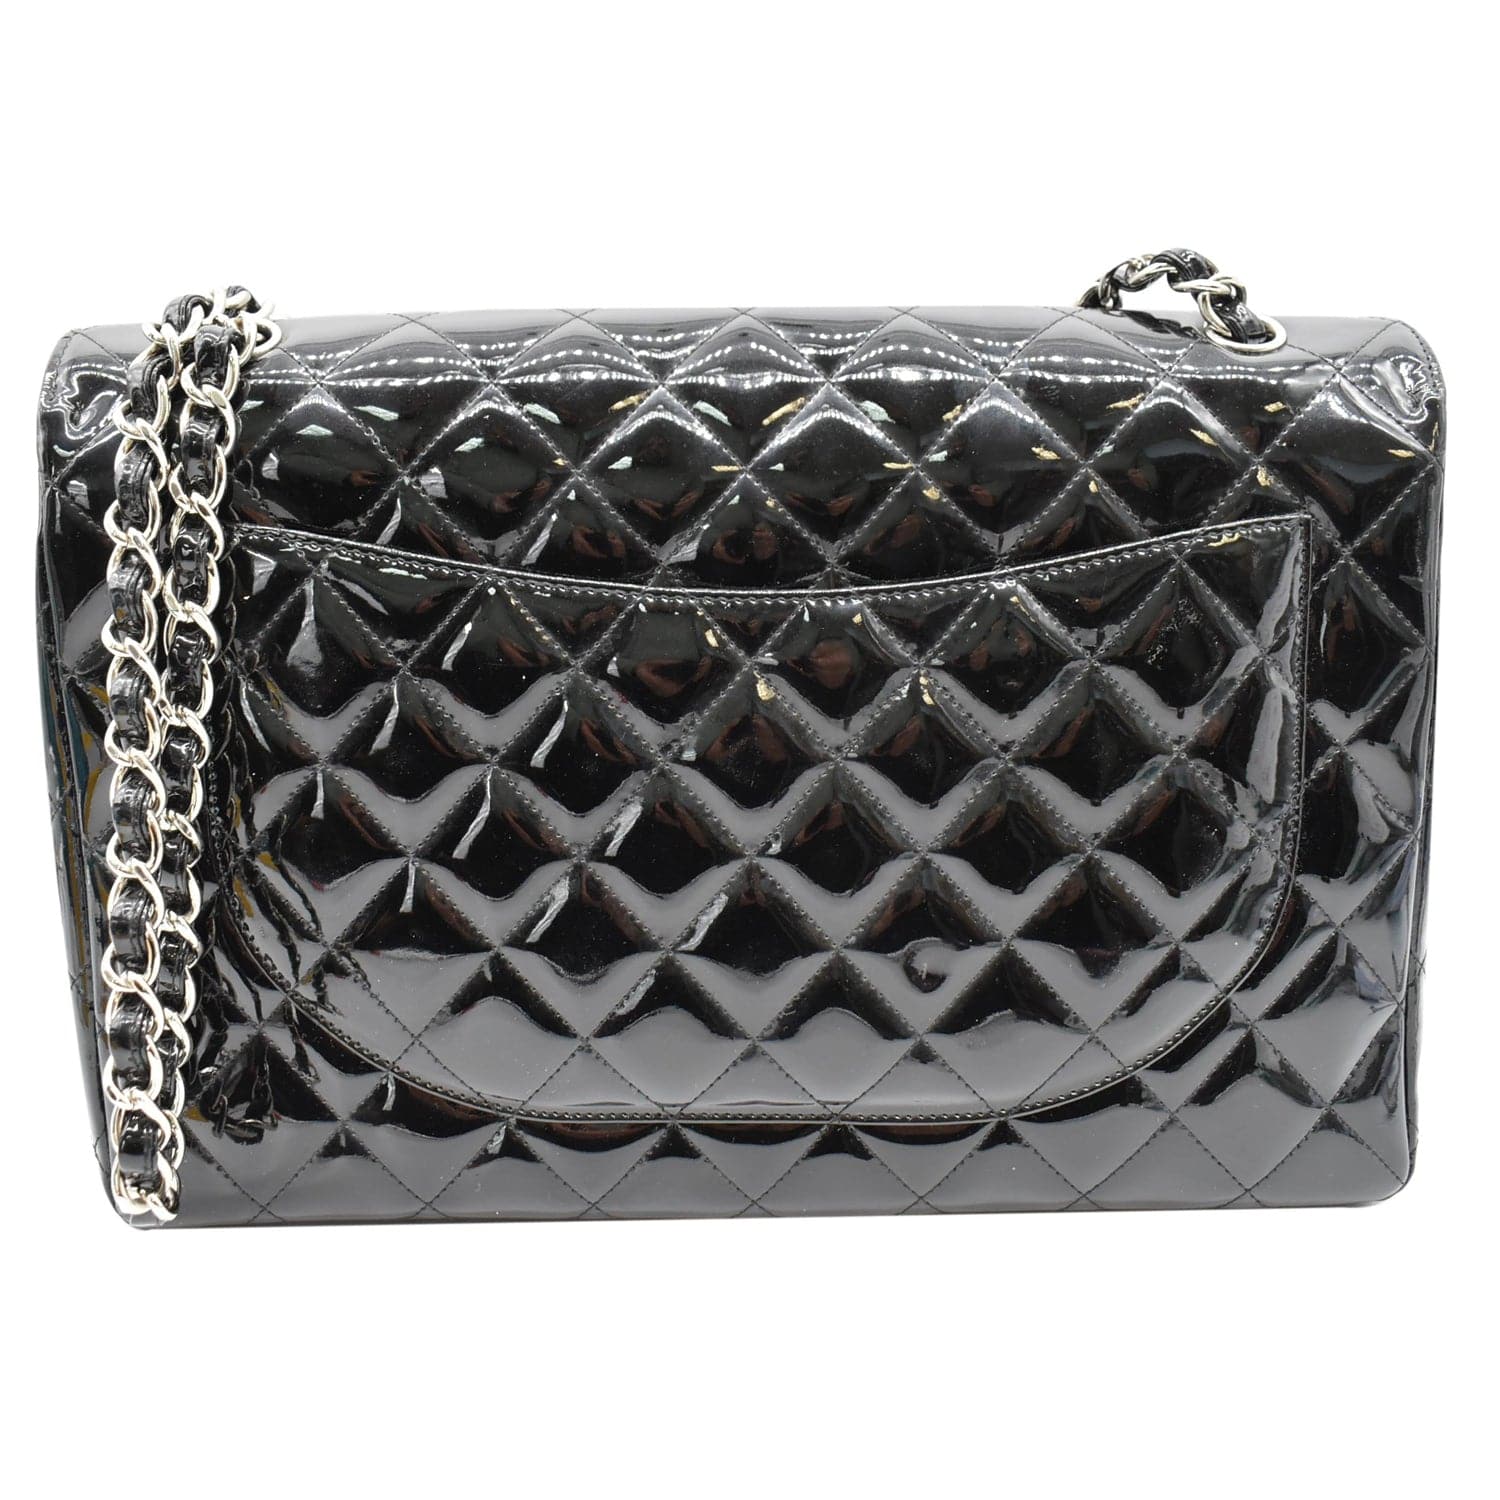 Chanel Rare Black Quilted Patent Leather Chain Around Maxi